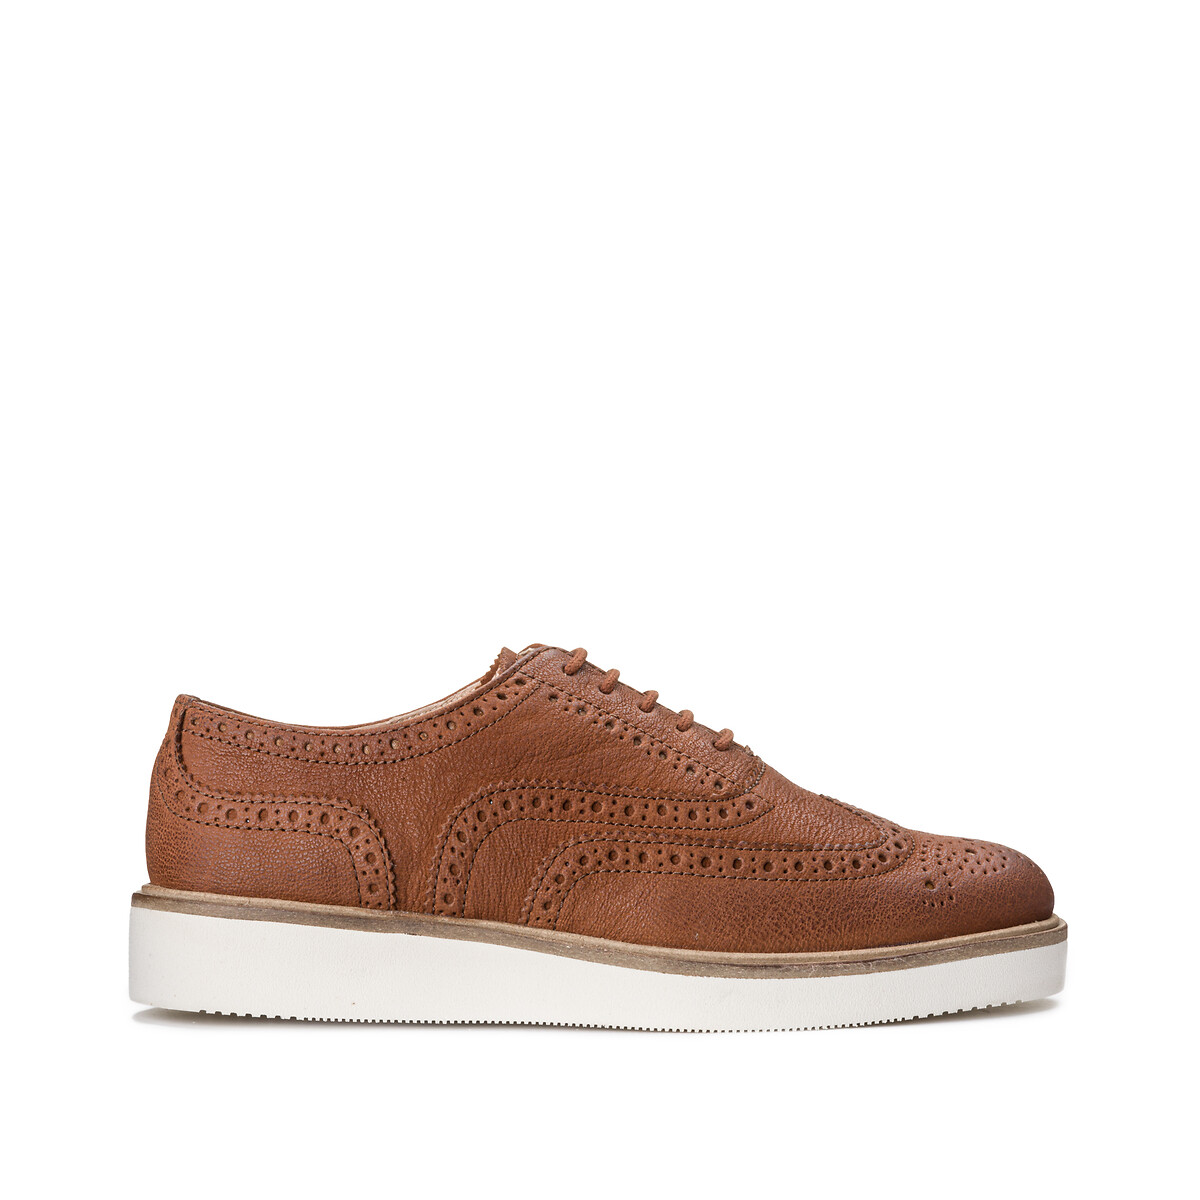 Clarks Baille Brogue Leather Brogues